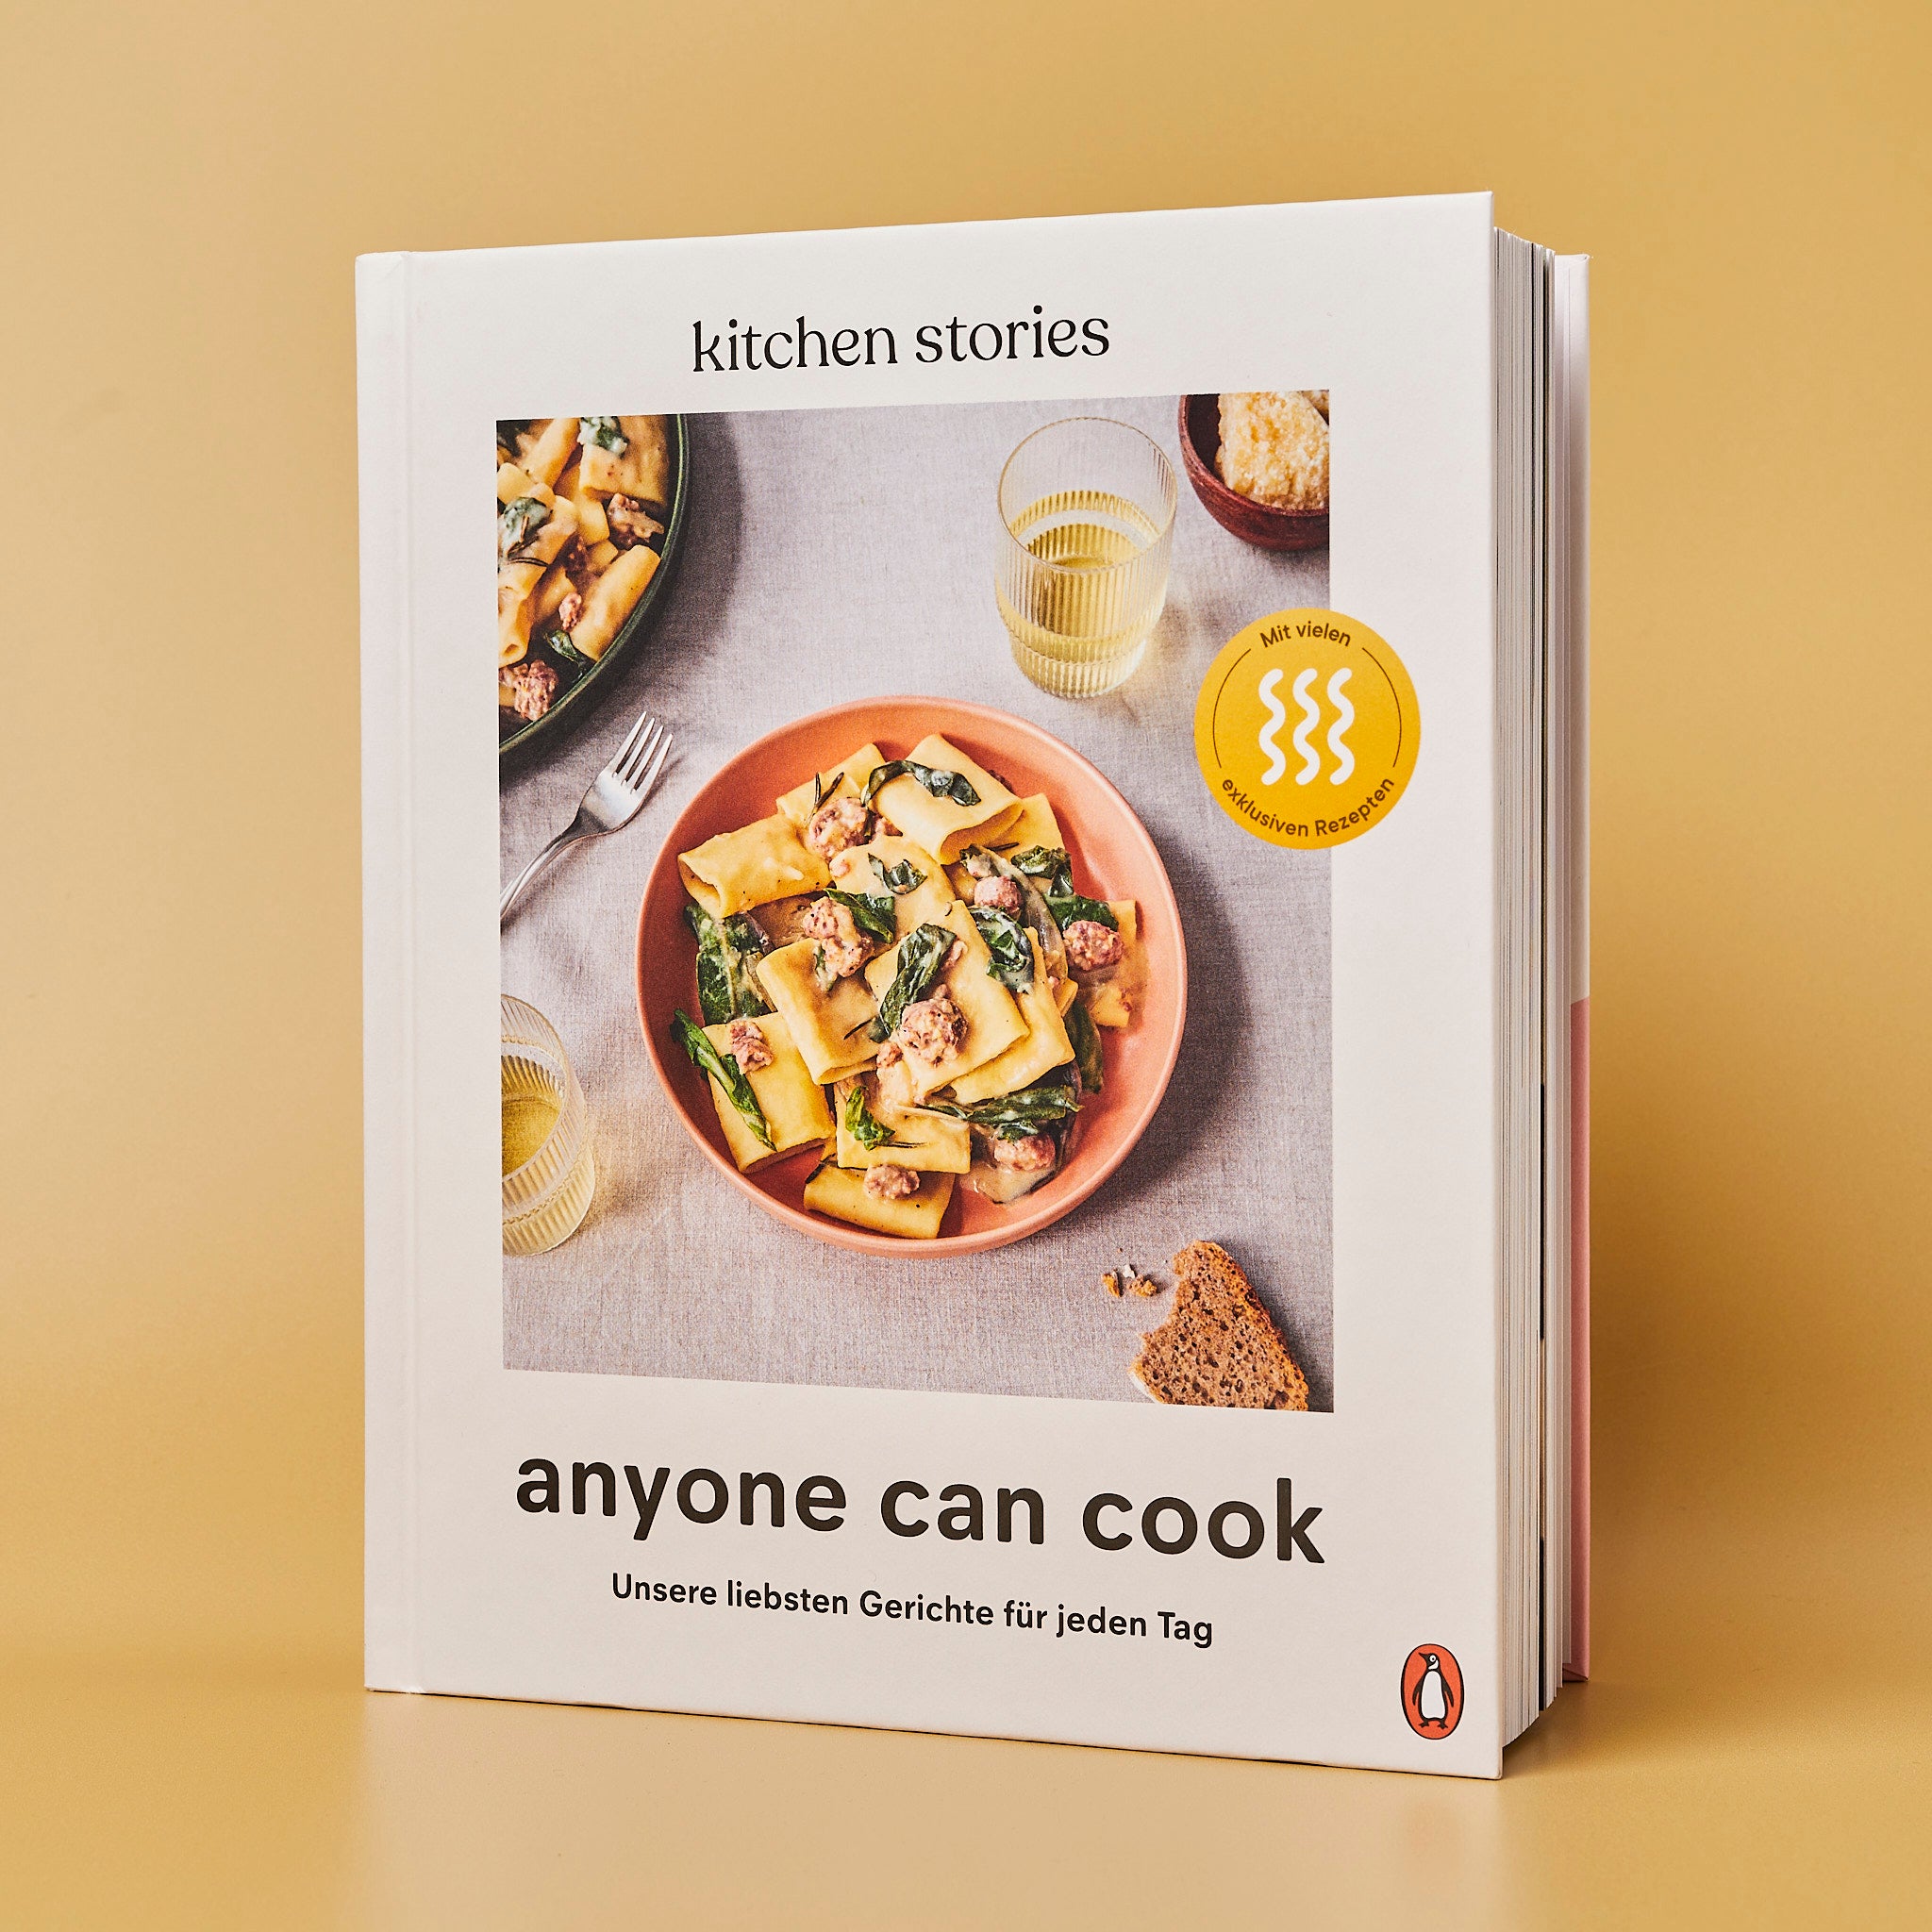 Kitchen Stories: anyone can cook